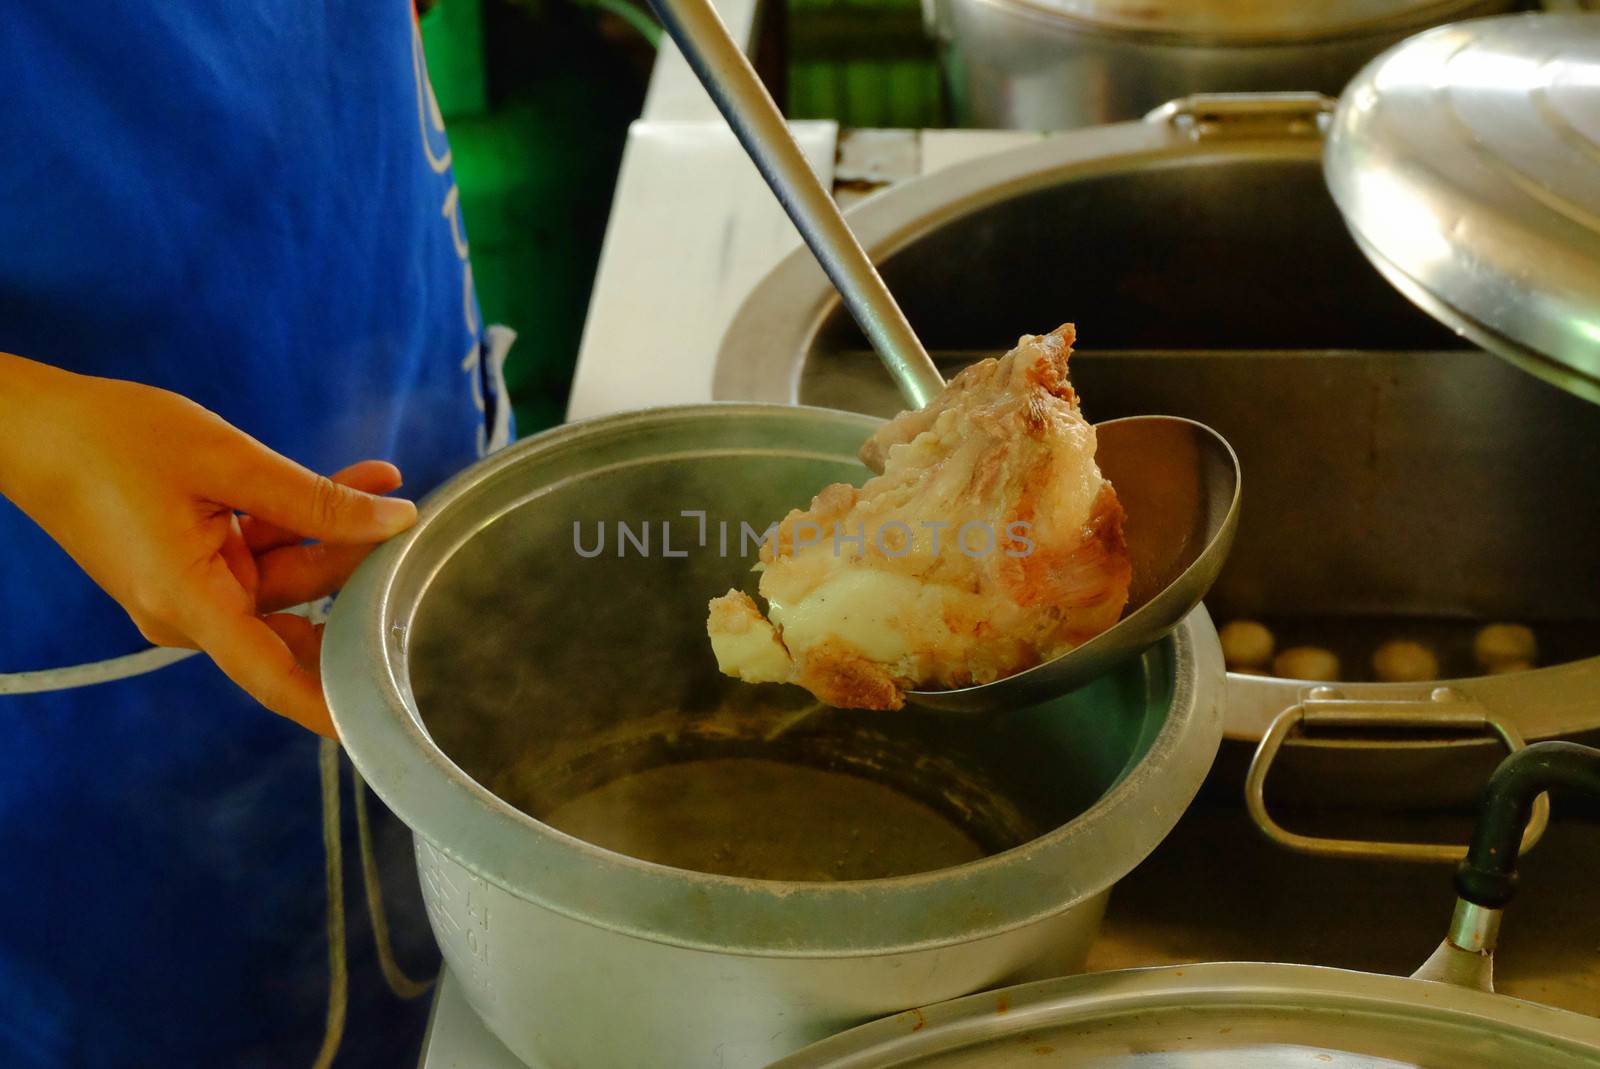 The ladle is drained porksoft in a bowl ,Cooking noodle in thailand,the noodles pork and beef.